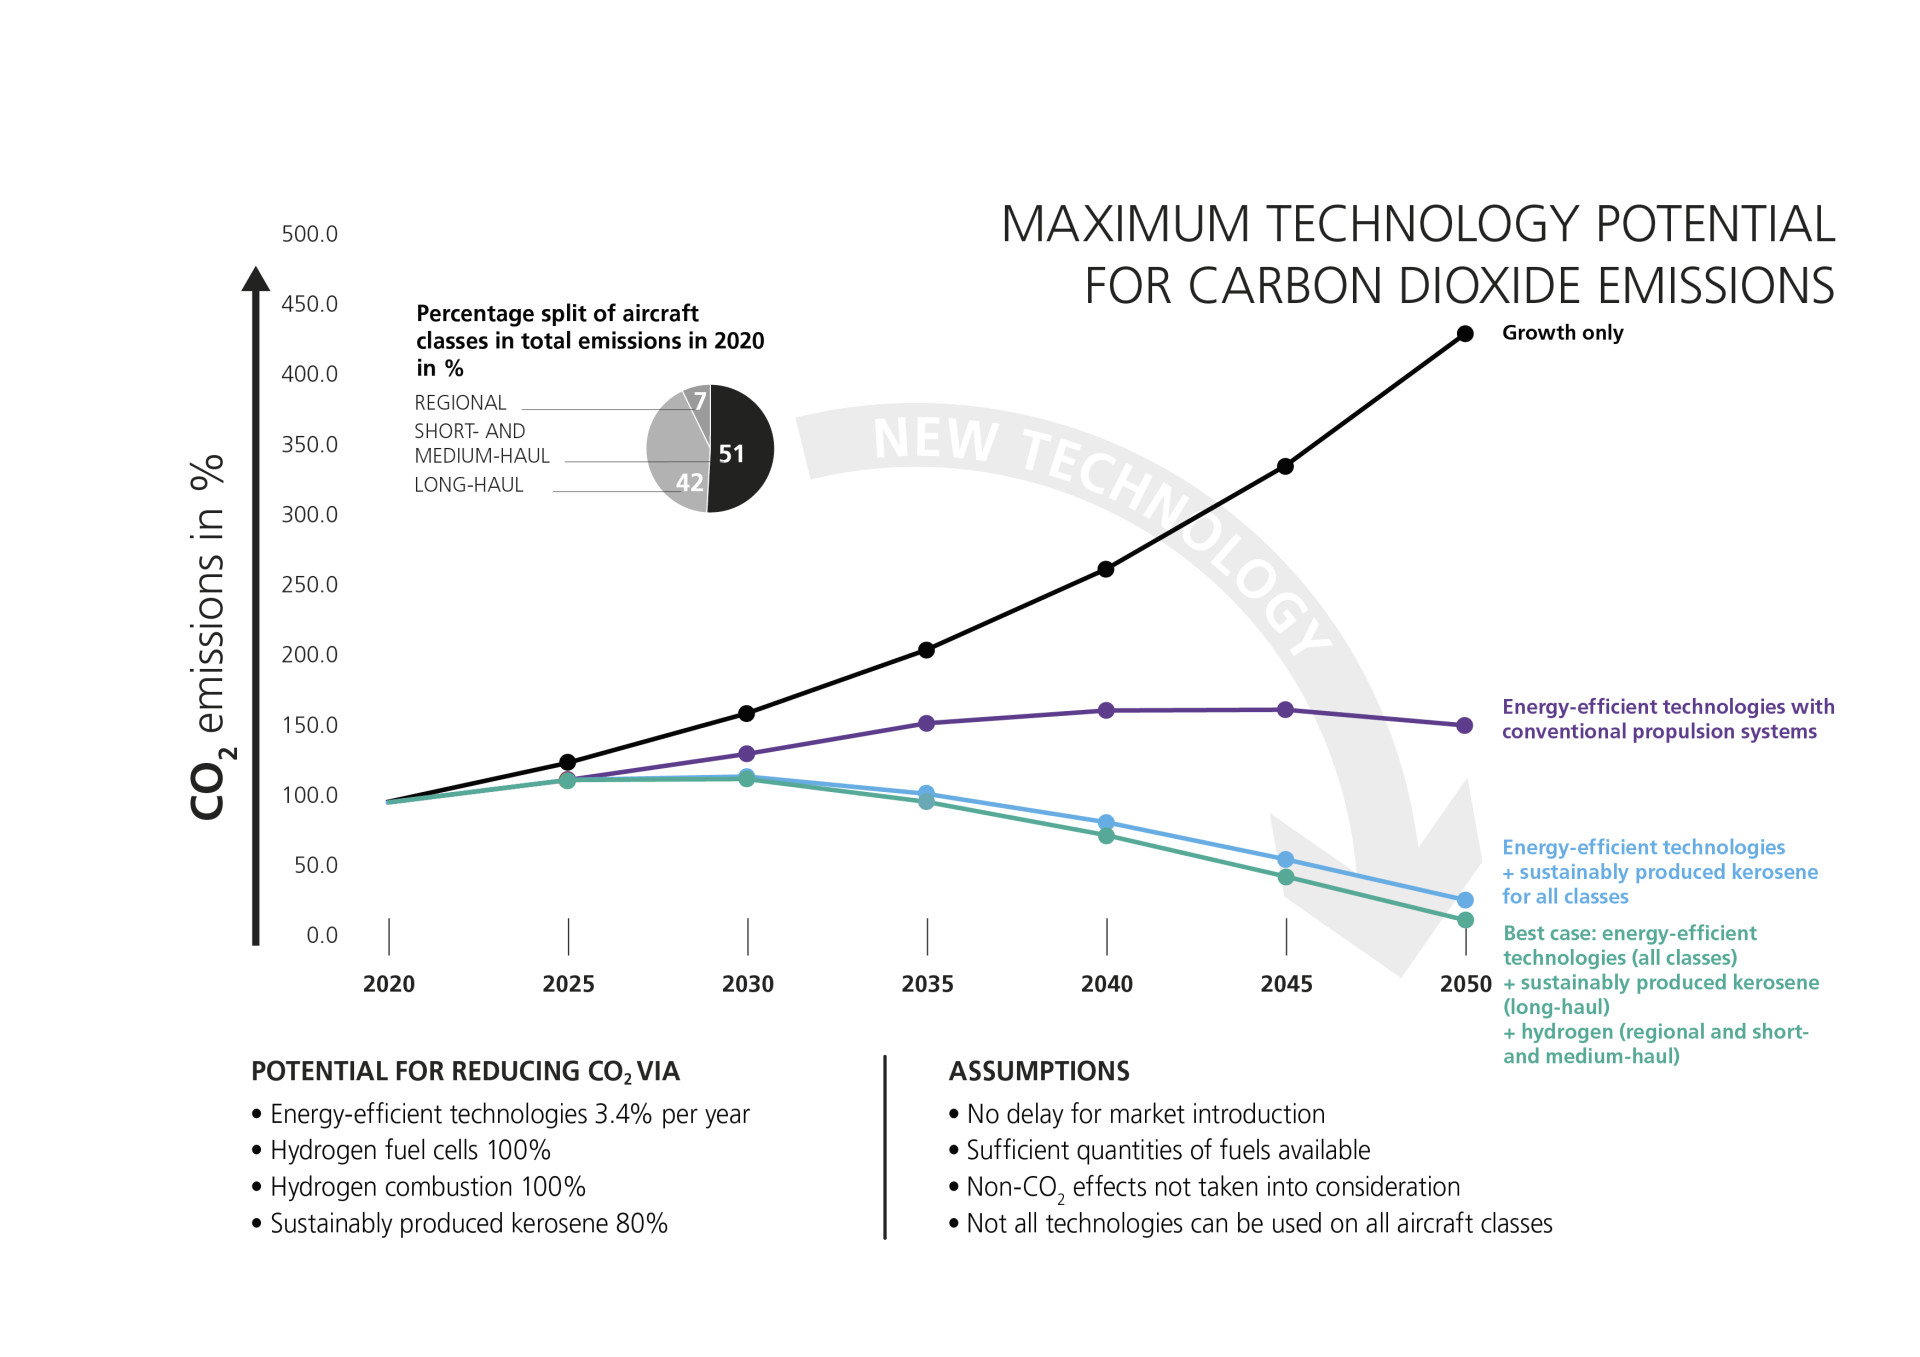 The graph shows the technology potential for curbing CO2 emissions in aviation.